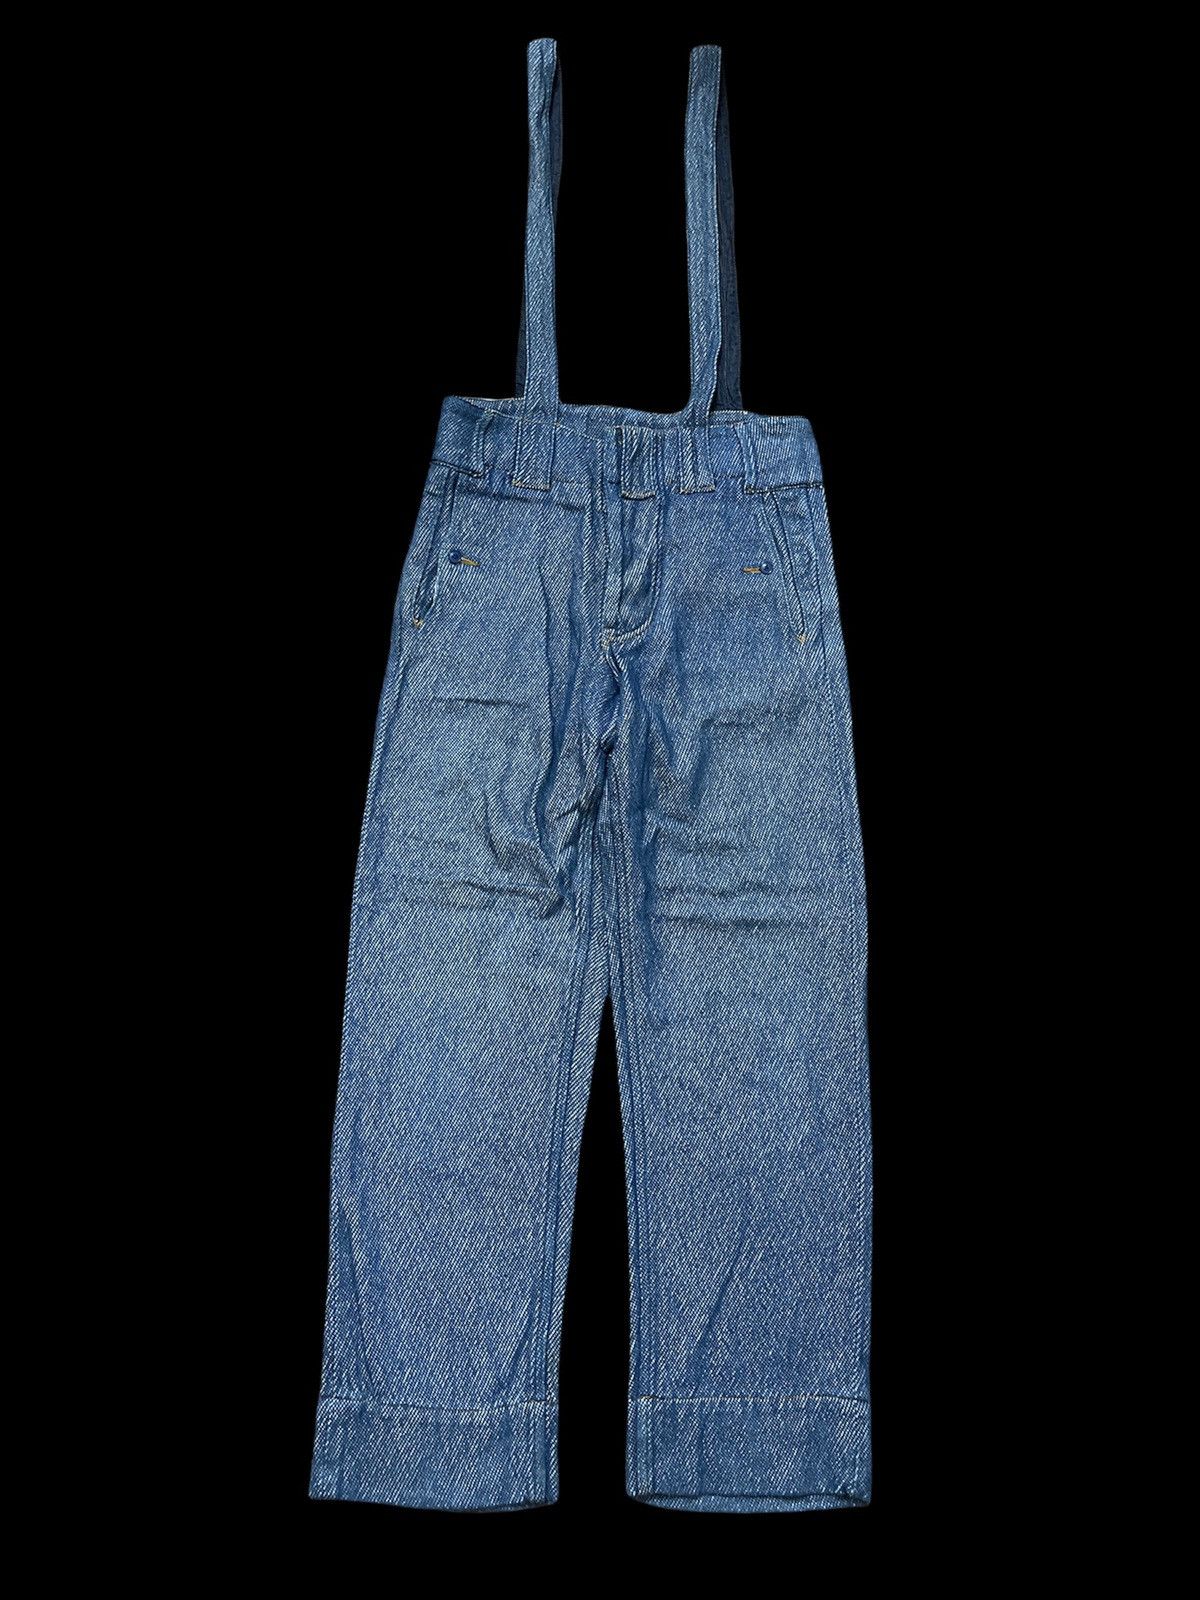 Issey Miyake Ne-Net by Issey Miyake Suspender Overall Pants Size US 30 / EU 46 - 1 Preview